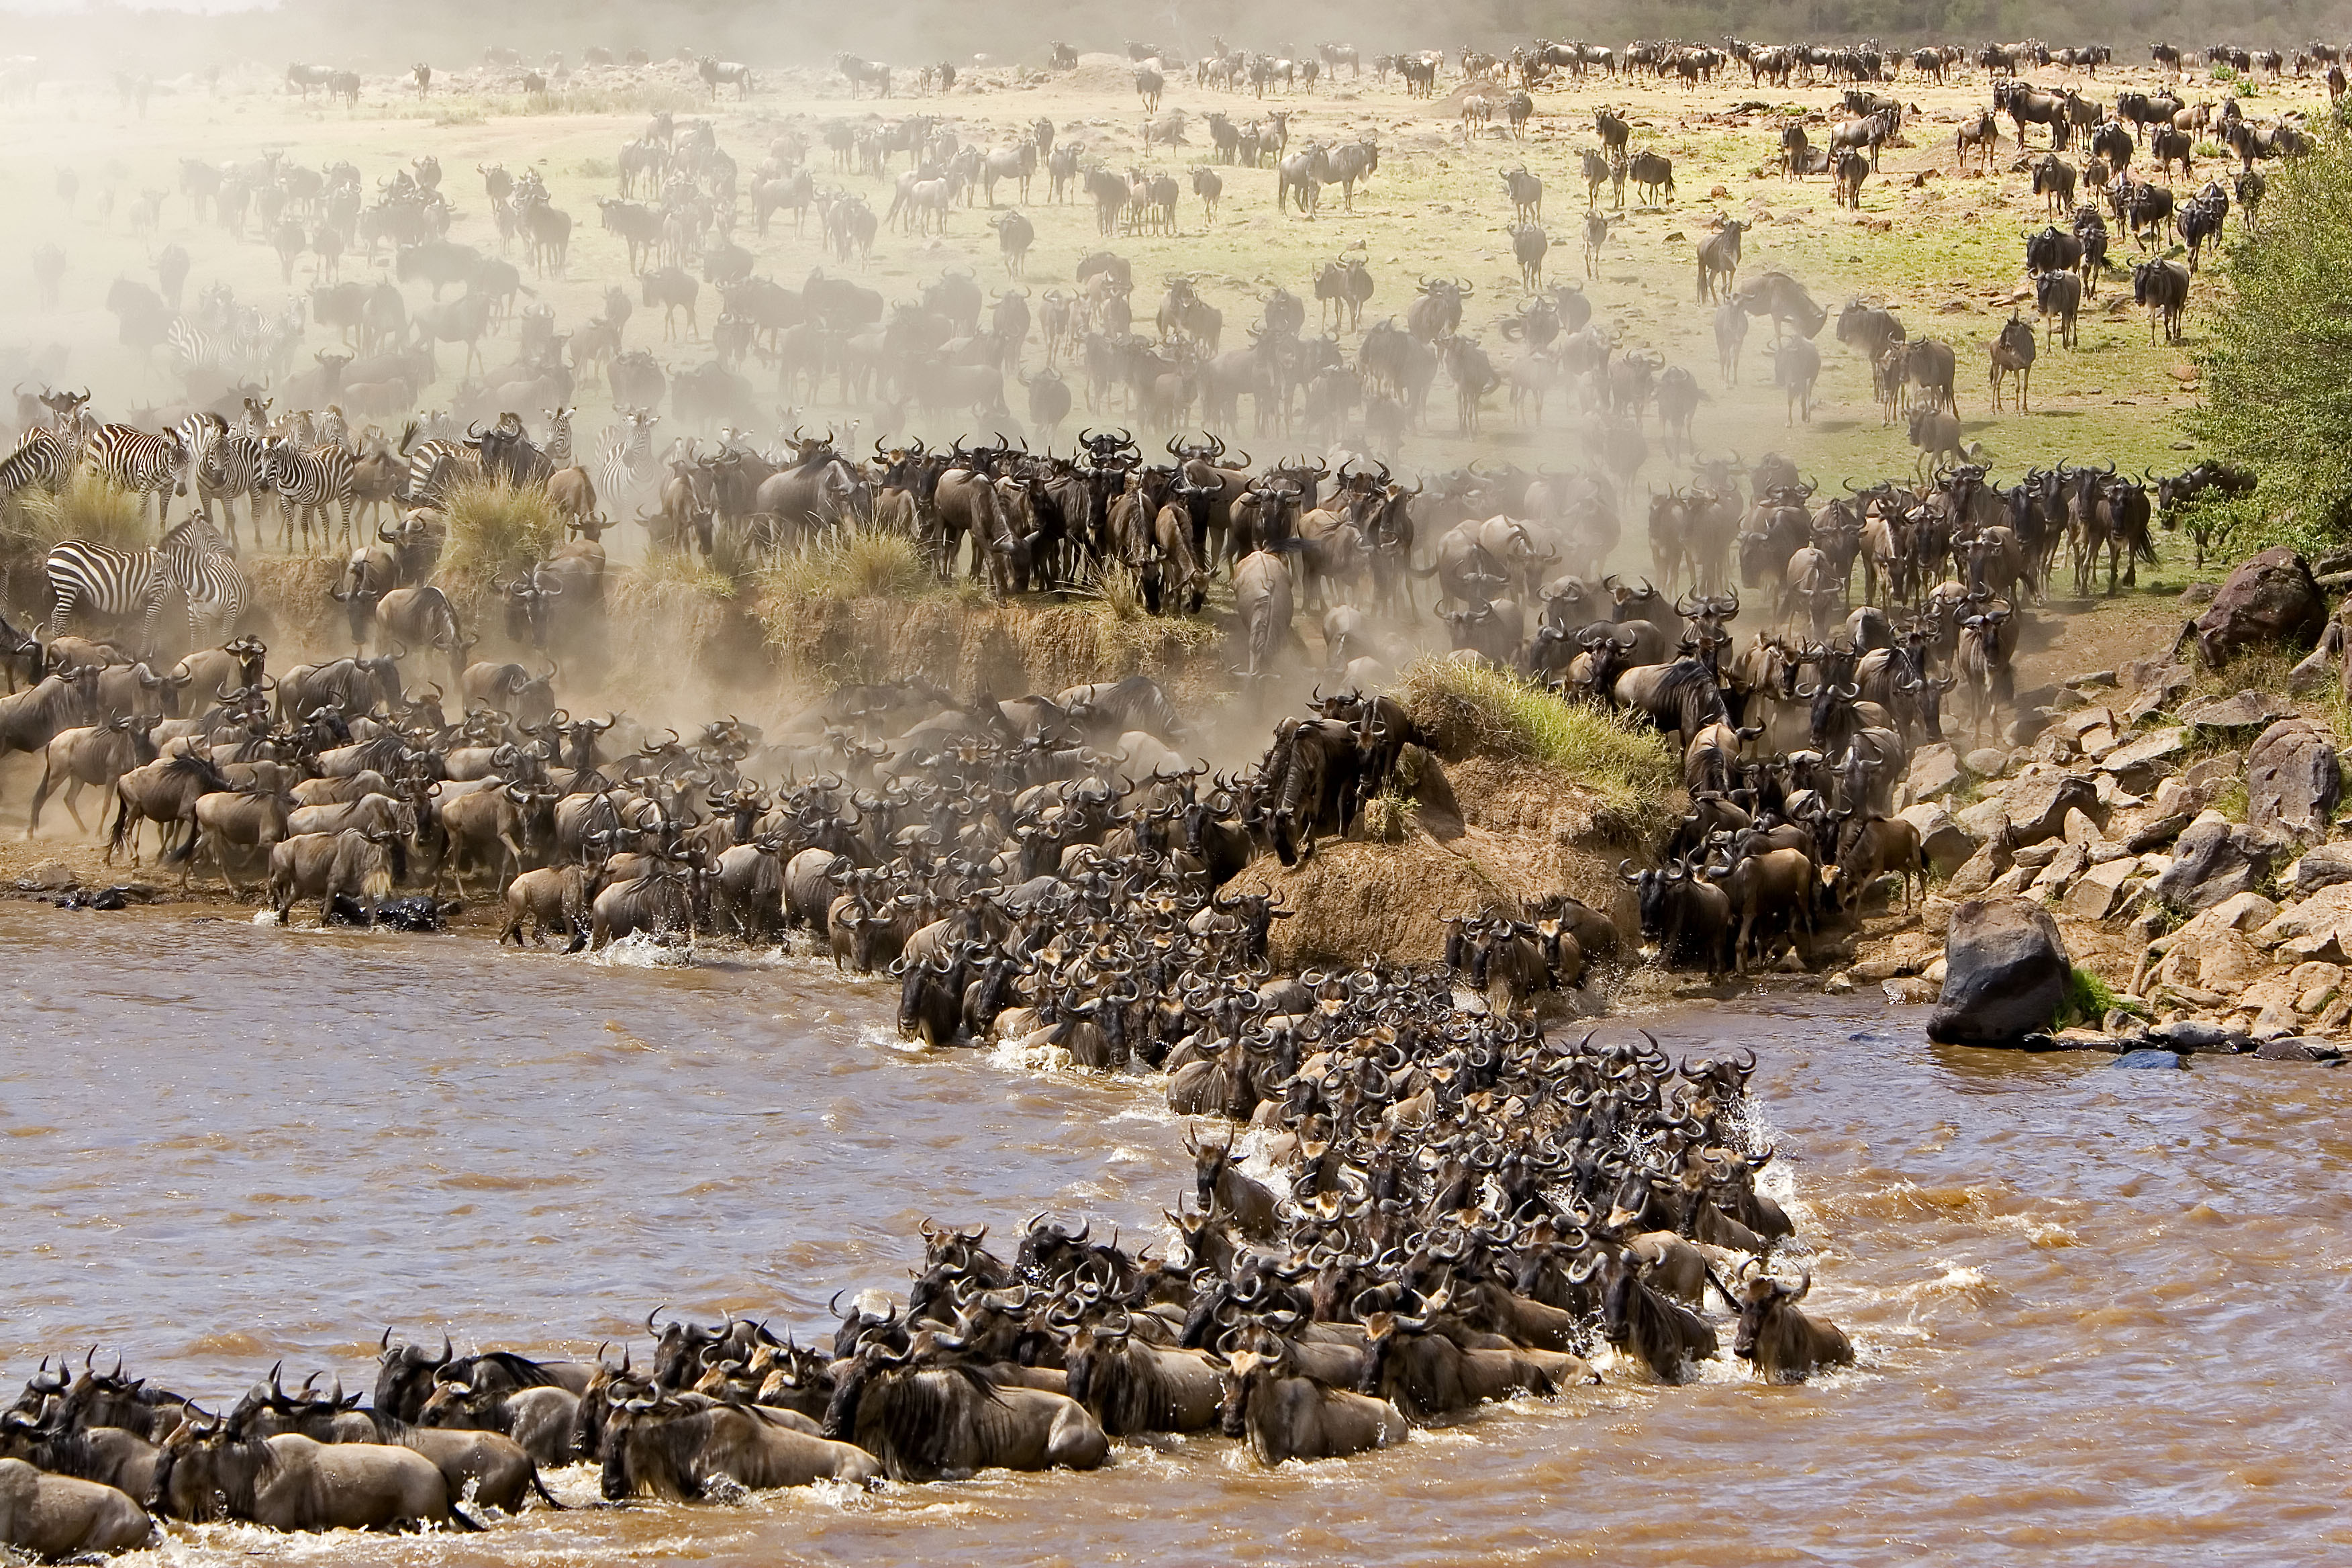 Around July of each year, millions of animals migrate between the Serengeti plains and the Maasai Mara in search of fresh pasture. The Great Migration is one of the most impressive natural events worldwide, involving some 1,300,000 blue wildebeest, 500,000 Thomson's gazelles, 97,000 topi, 18,000 common elands, and 200,000 Grant's zebras.